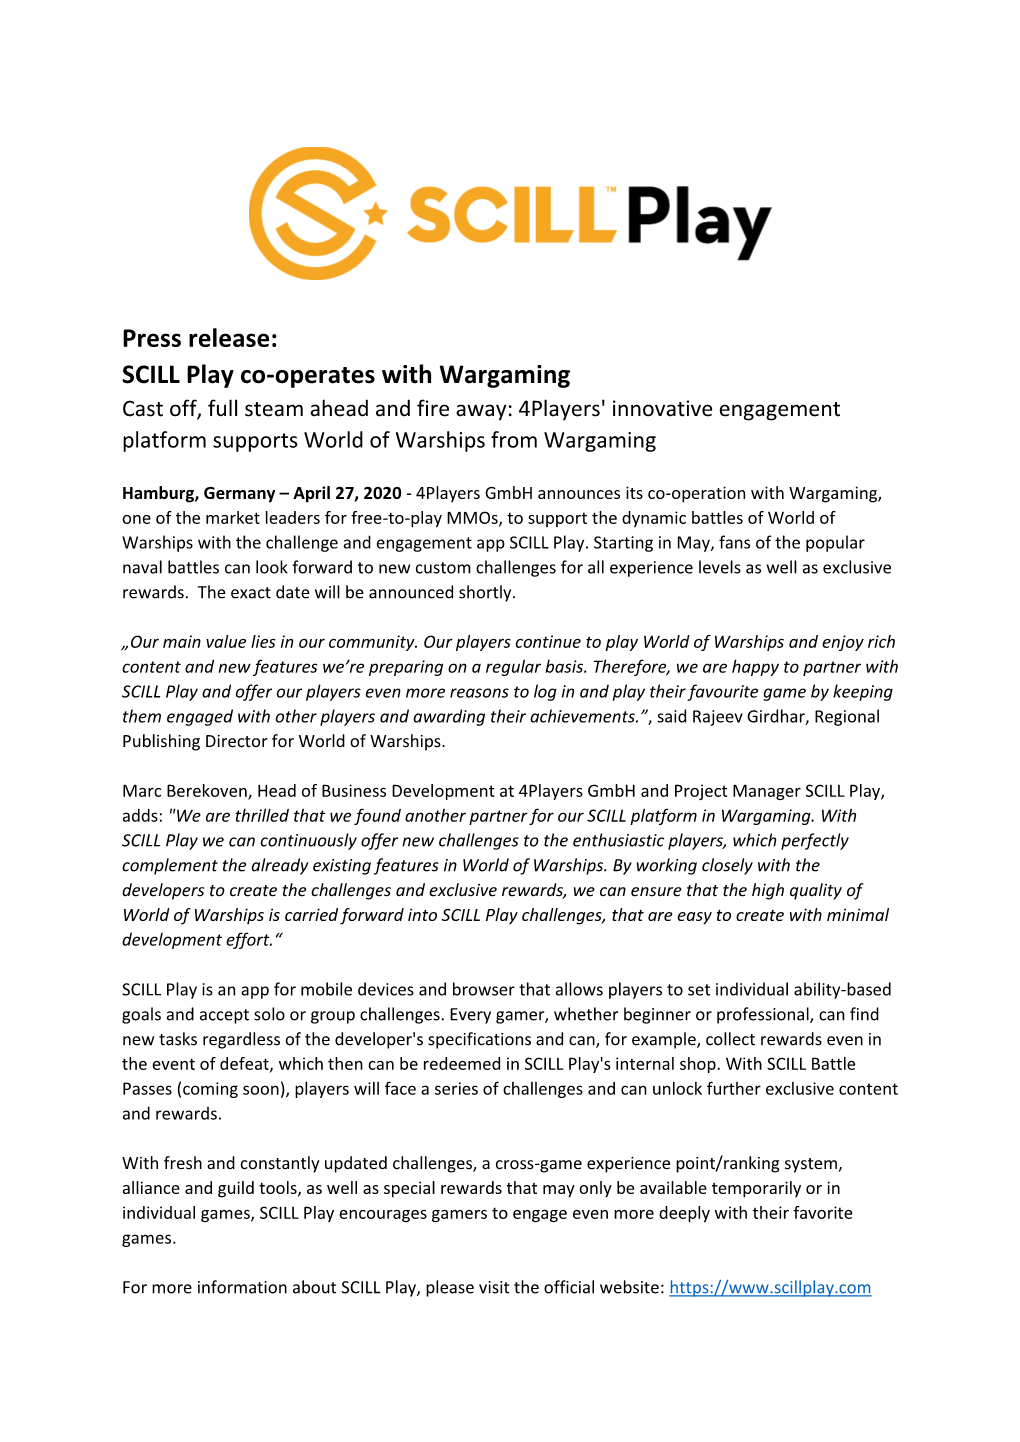 SCILL Play Co-Operates with Wargaming Cast Off, Full Steam Ahead and Fire Away: 4Players' Innovative Engagement Platform Supports World of Warships from Wargaming